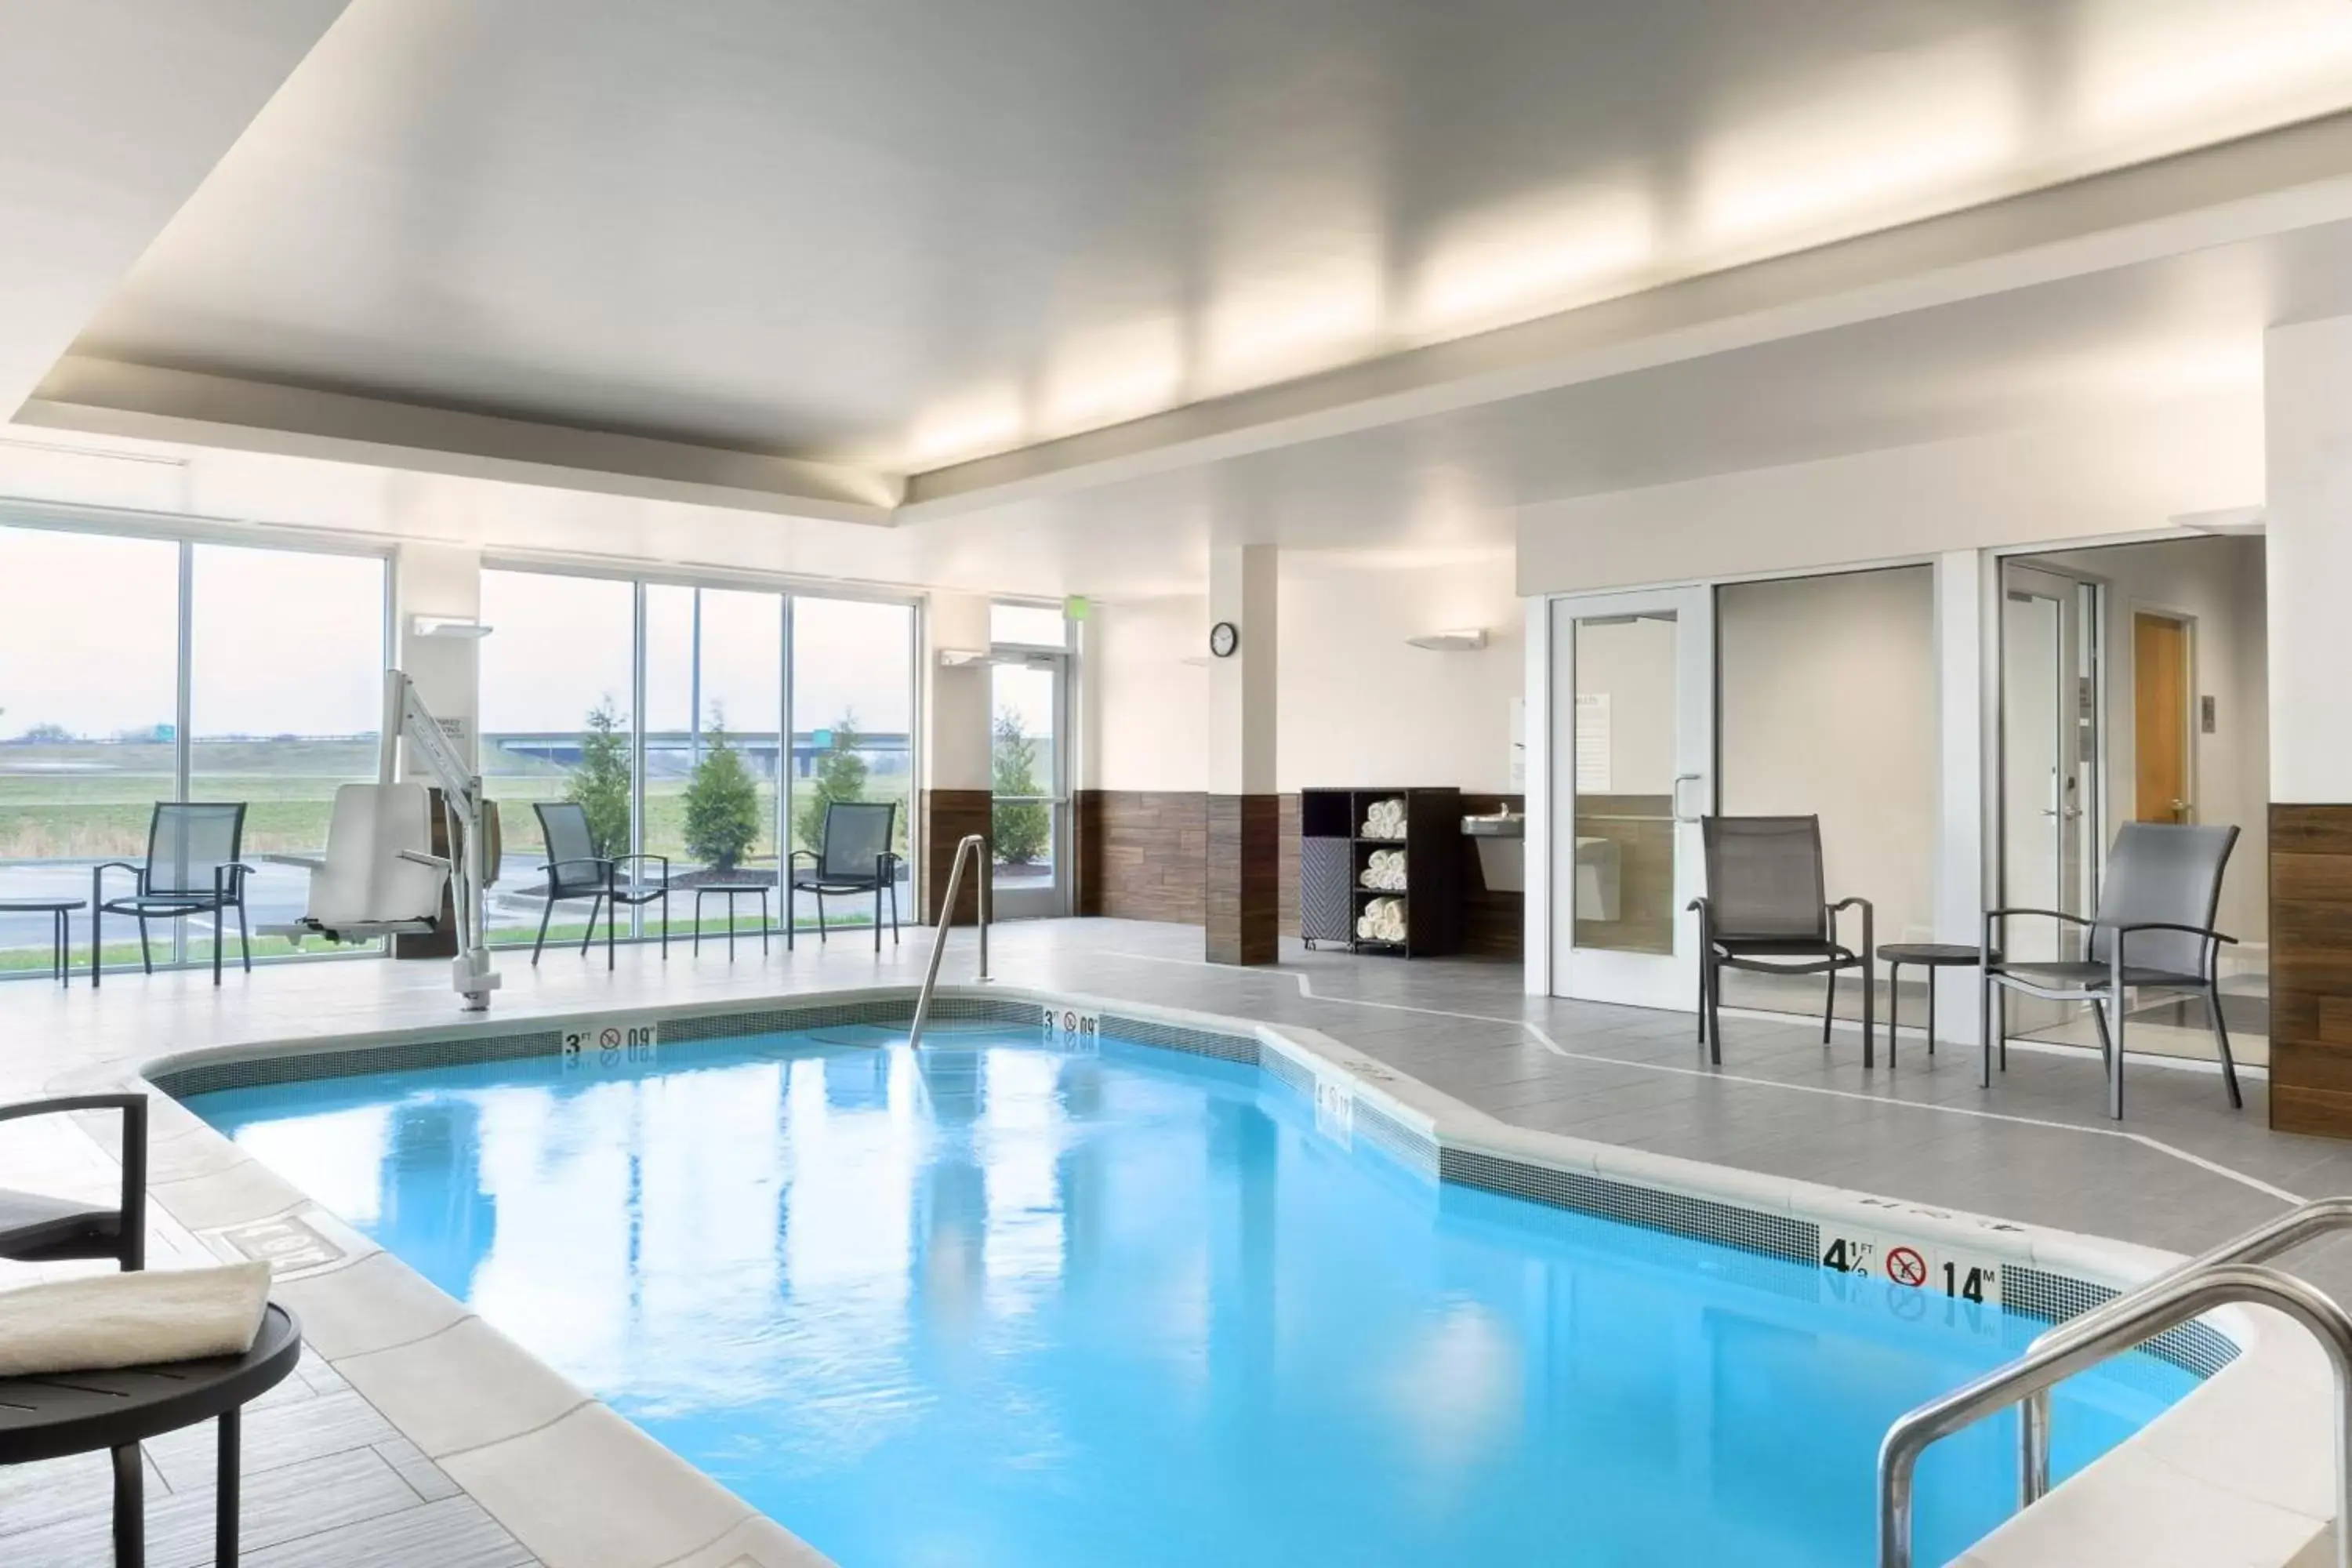 Swimming Pool in Fairfield by Marriott Inn and Suites O Fallon IL